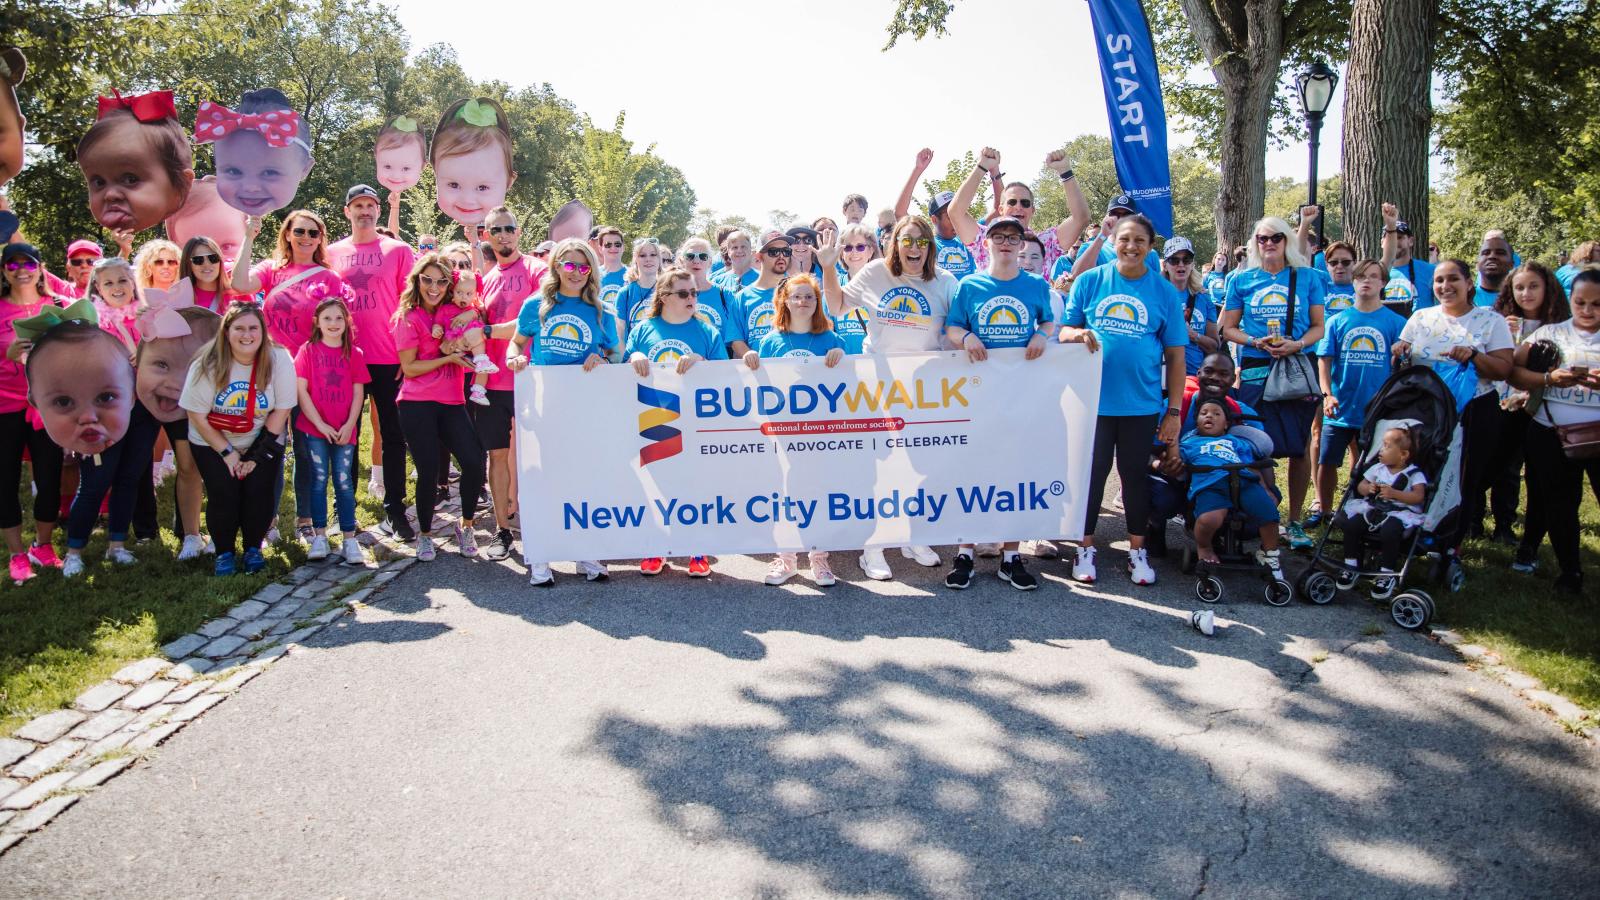 Grand marshals and walkers kicking off nyc buddy walk with banner